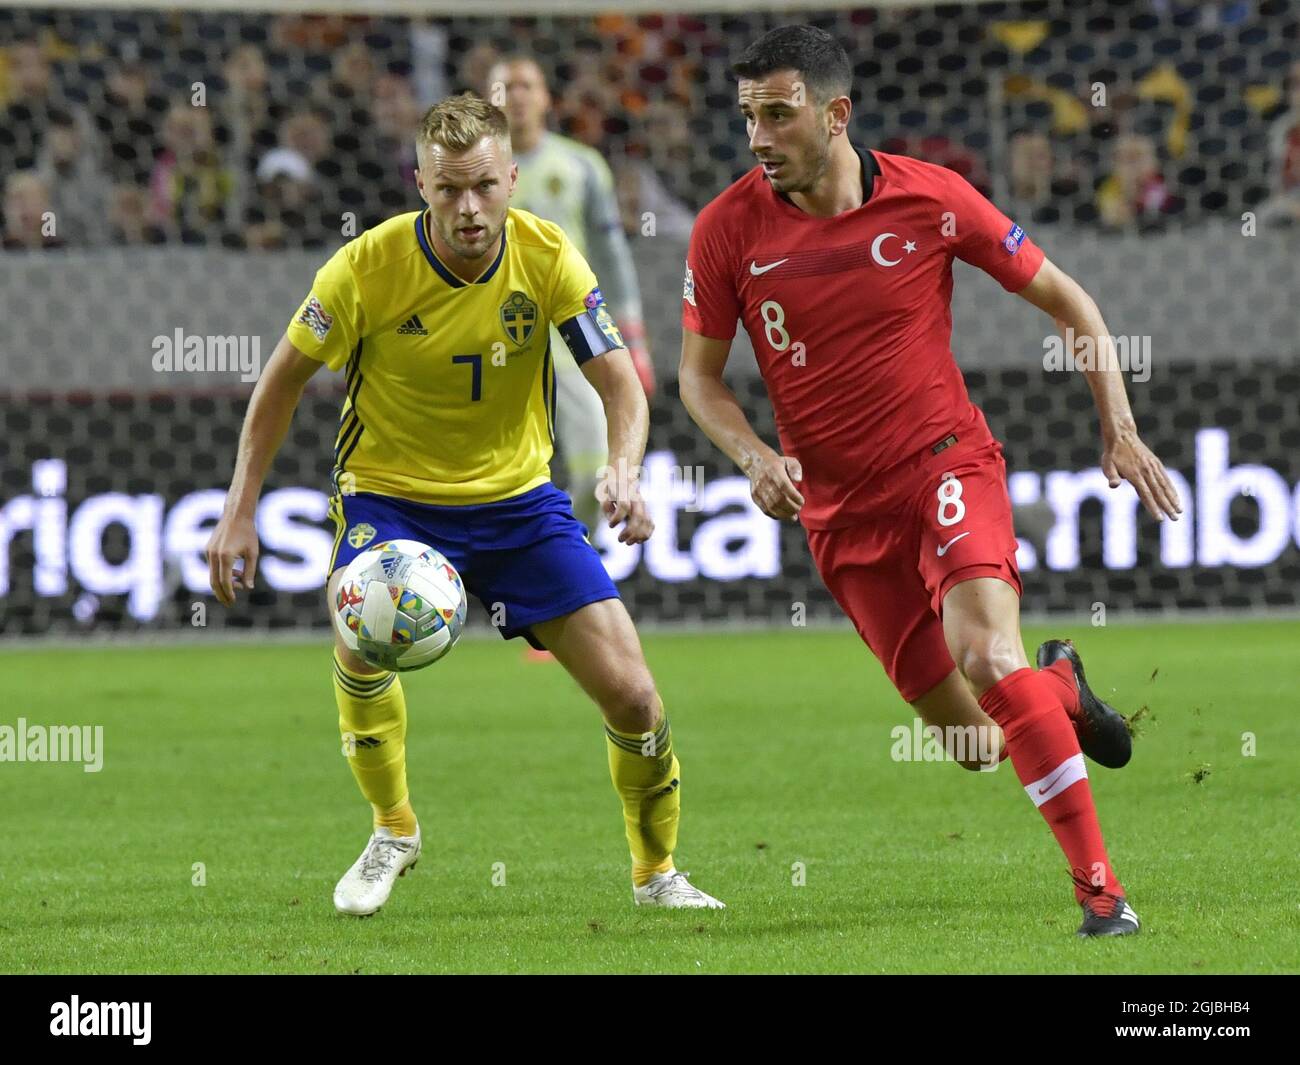 Sweden's Sebastian Larsson (L) fights for the ball with Turkey's Oguzhan Ozyakup during the UEFA Nations League, league B, group 2, soccer match between Sweden and Turkey at Friends Arena in Solna, Stockholm, Sweden, on Sept. 10, 2018. Photo: Jonas Ekstromer / TT / code 10030  Stock Photo